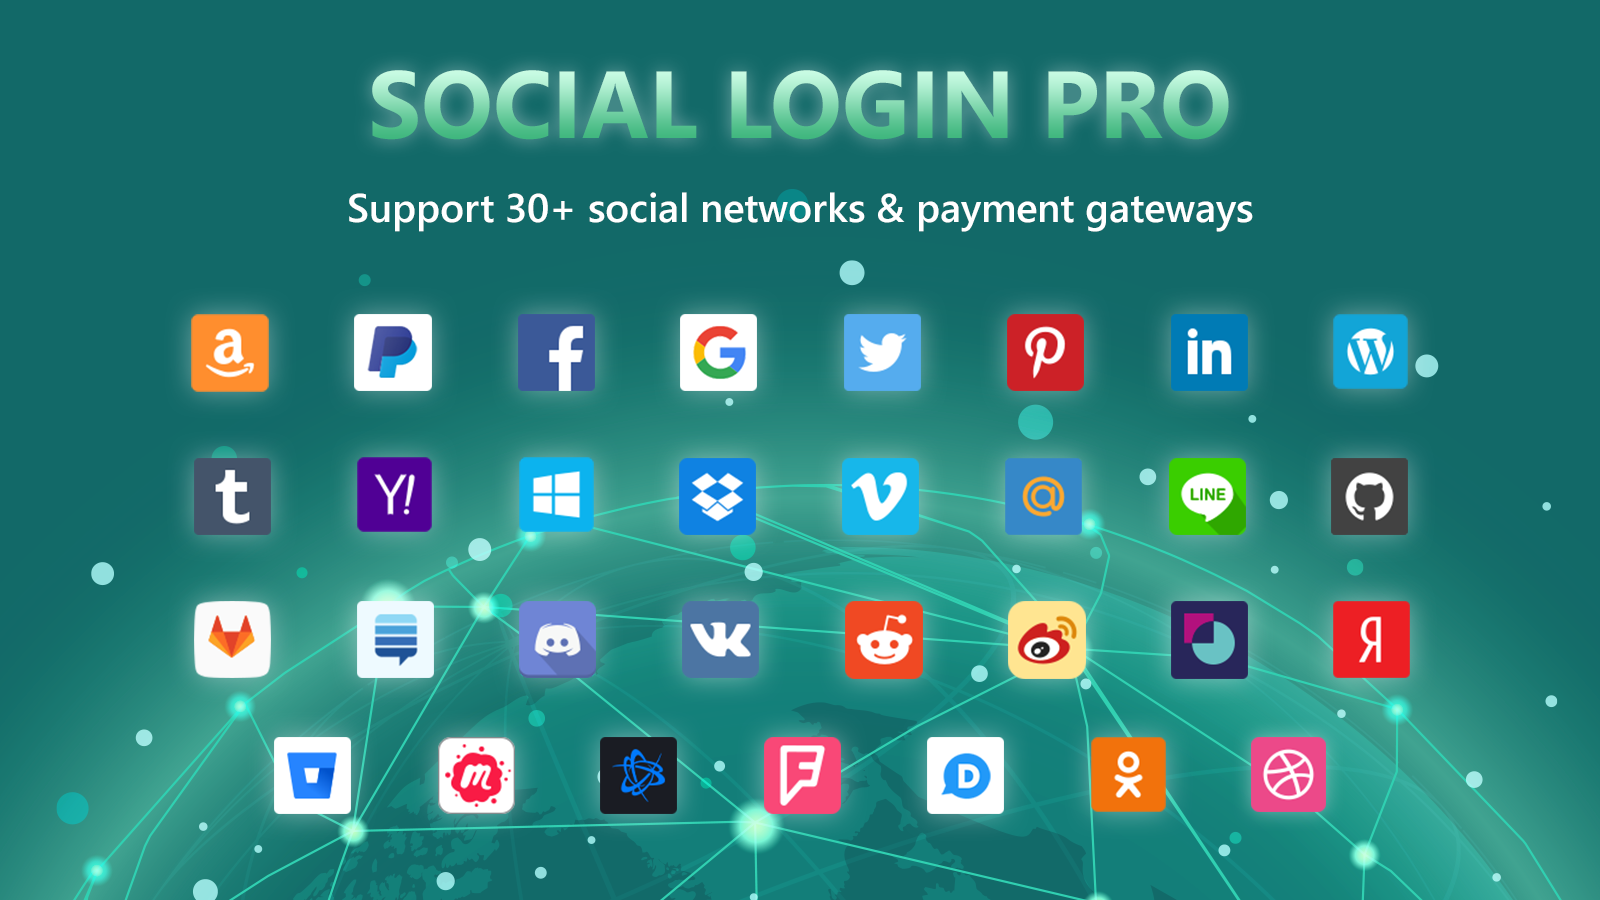 Support 30+ social networks